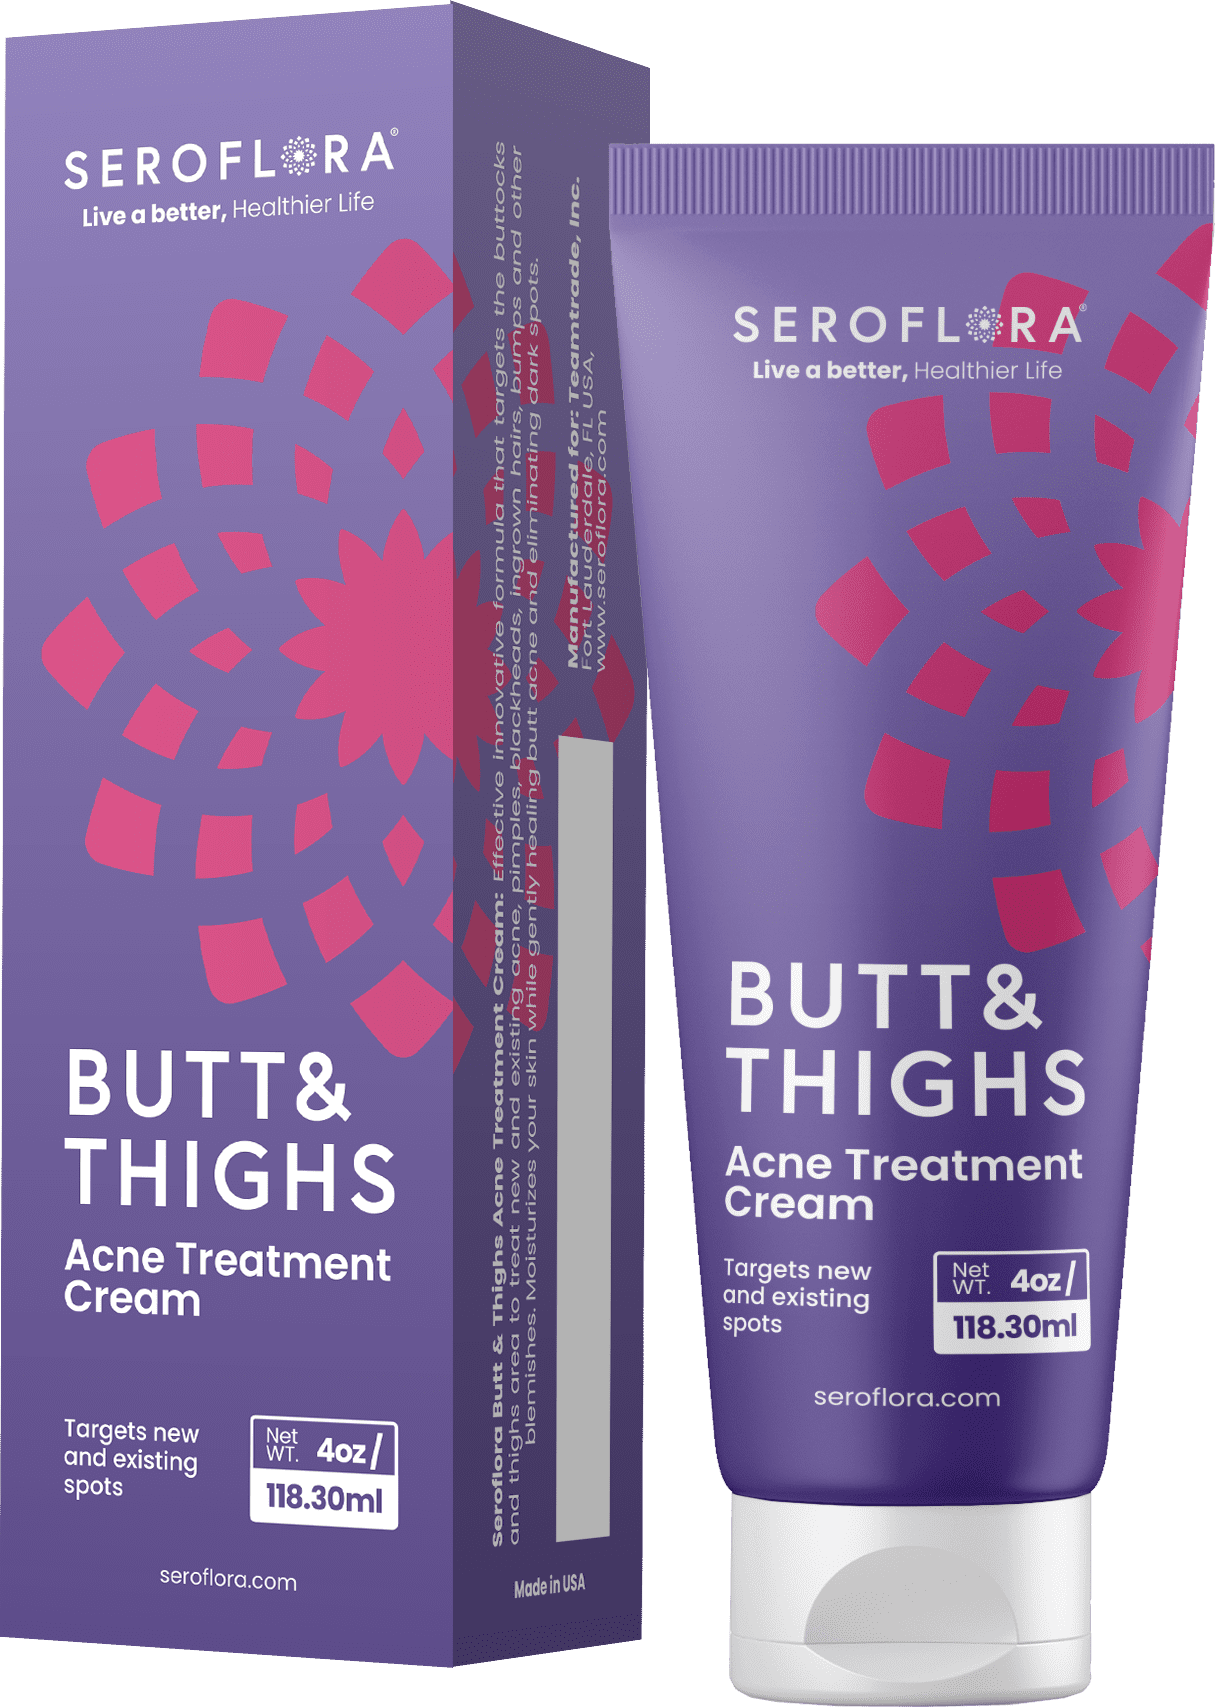 Seroflora Butt & Thighs Acne Treatment Cream - Butt Acne Clearing Cream for  Pimples, Zits, Razor Bumps, Dark Spots - Acne Clearing Lotion for Buttocks  & Body - Inner Thigh Blackhead Remover (